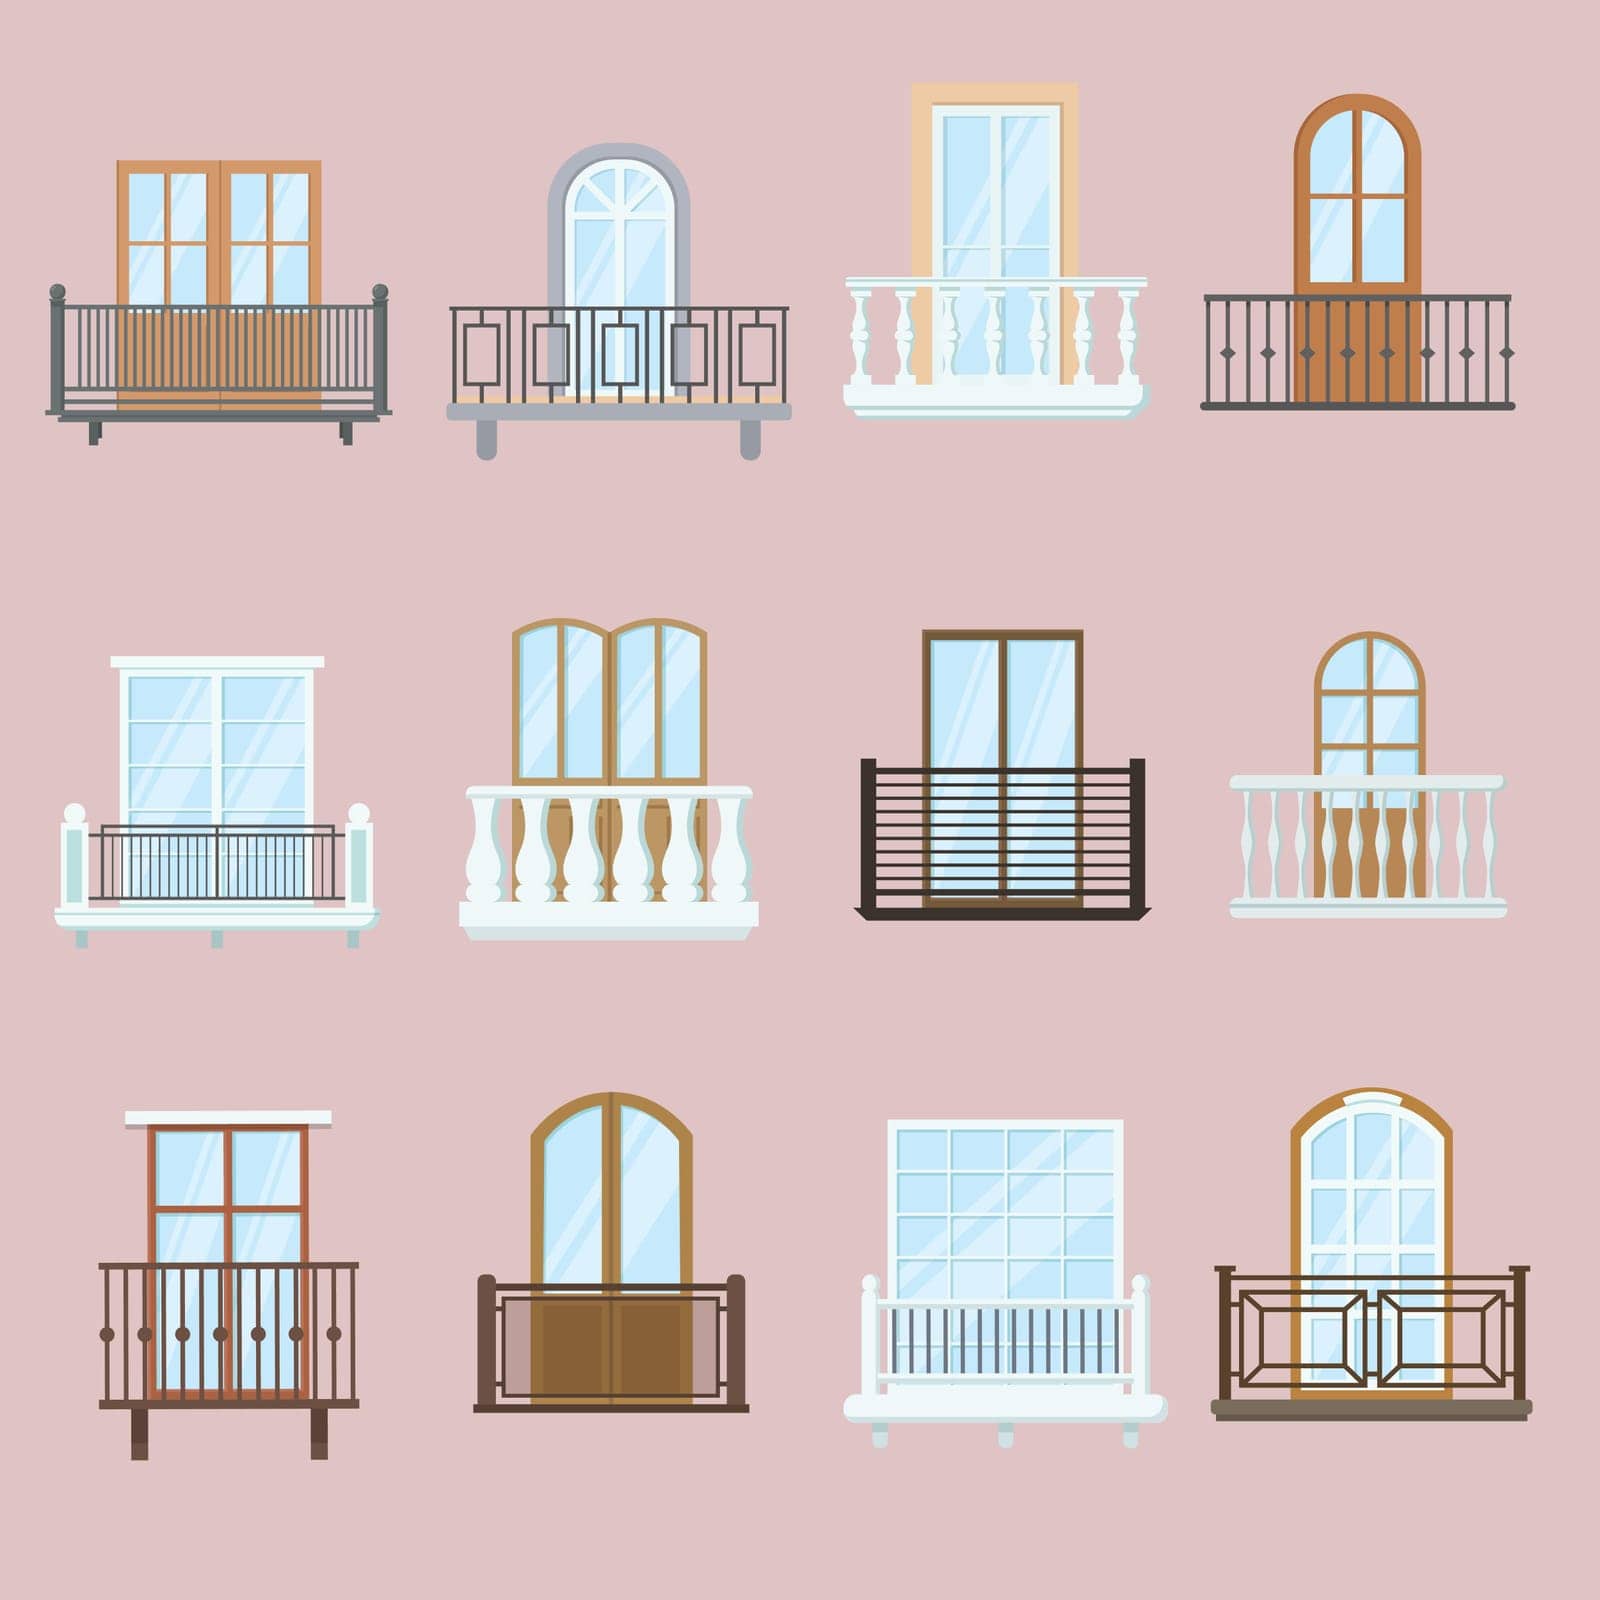 Windows and balconies set. Classic and old vintage architecture balconies with fence railings decor design. Flat vector illustration. Building facade decoration concept